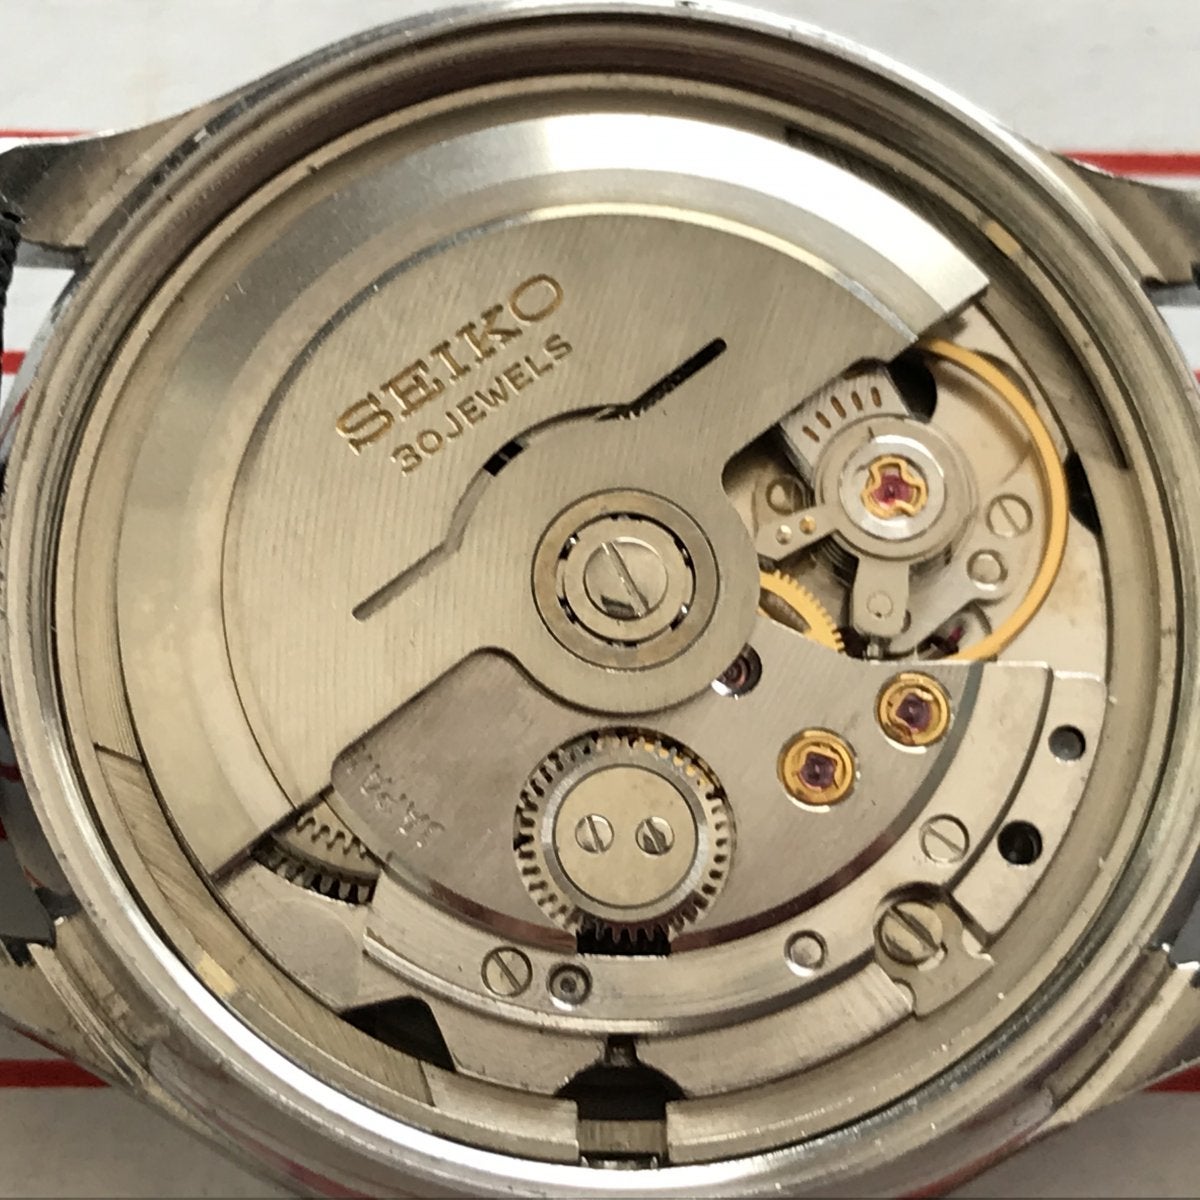 sticking crown release button on Seiko 8306 - 1000 movement | The Watch Site